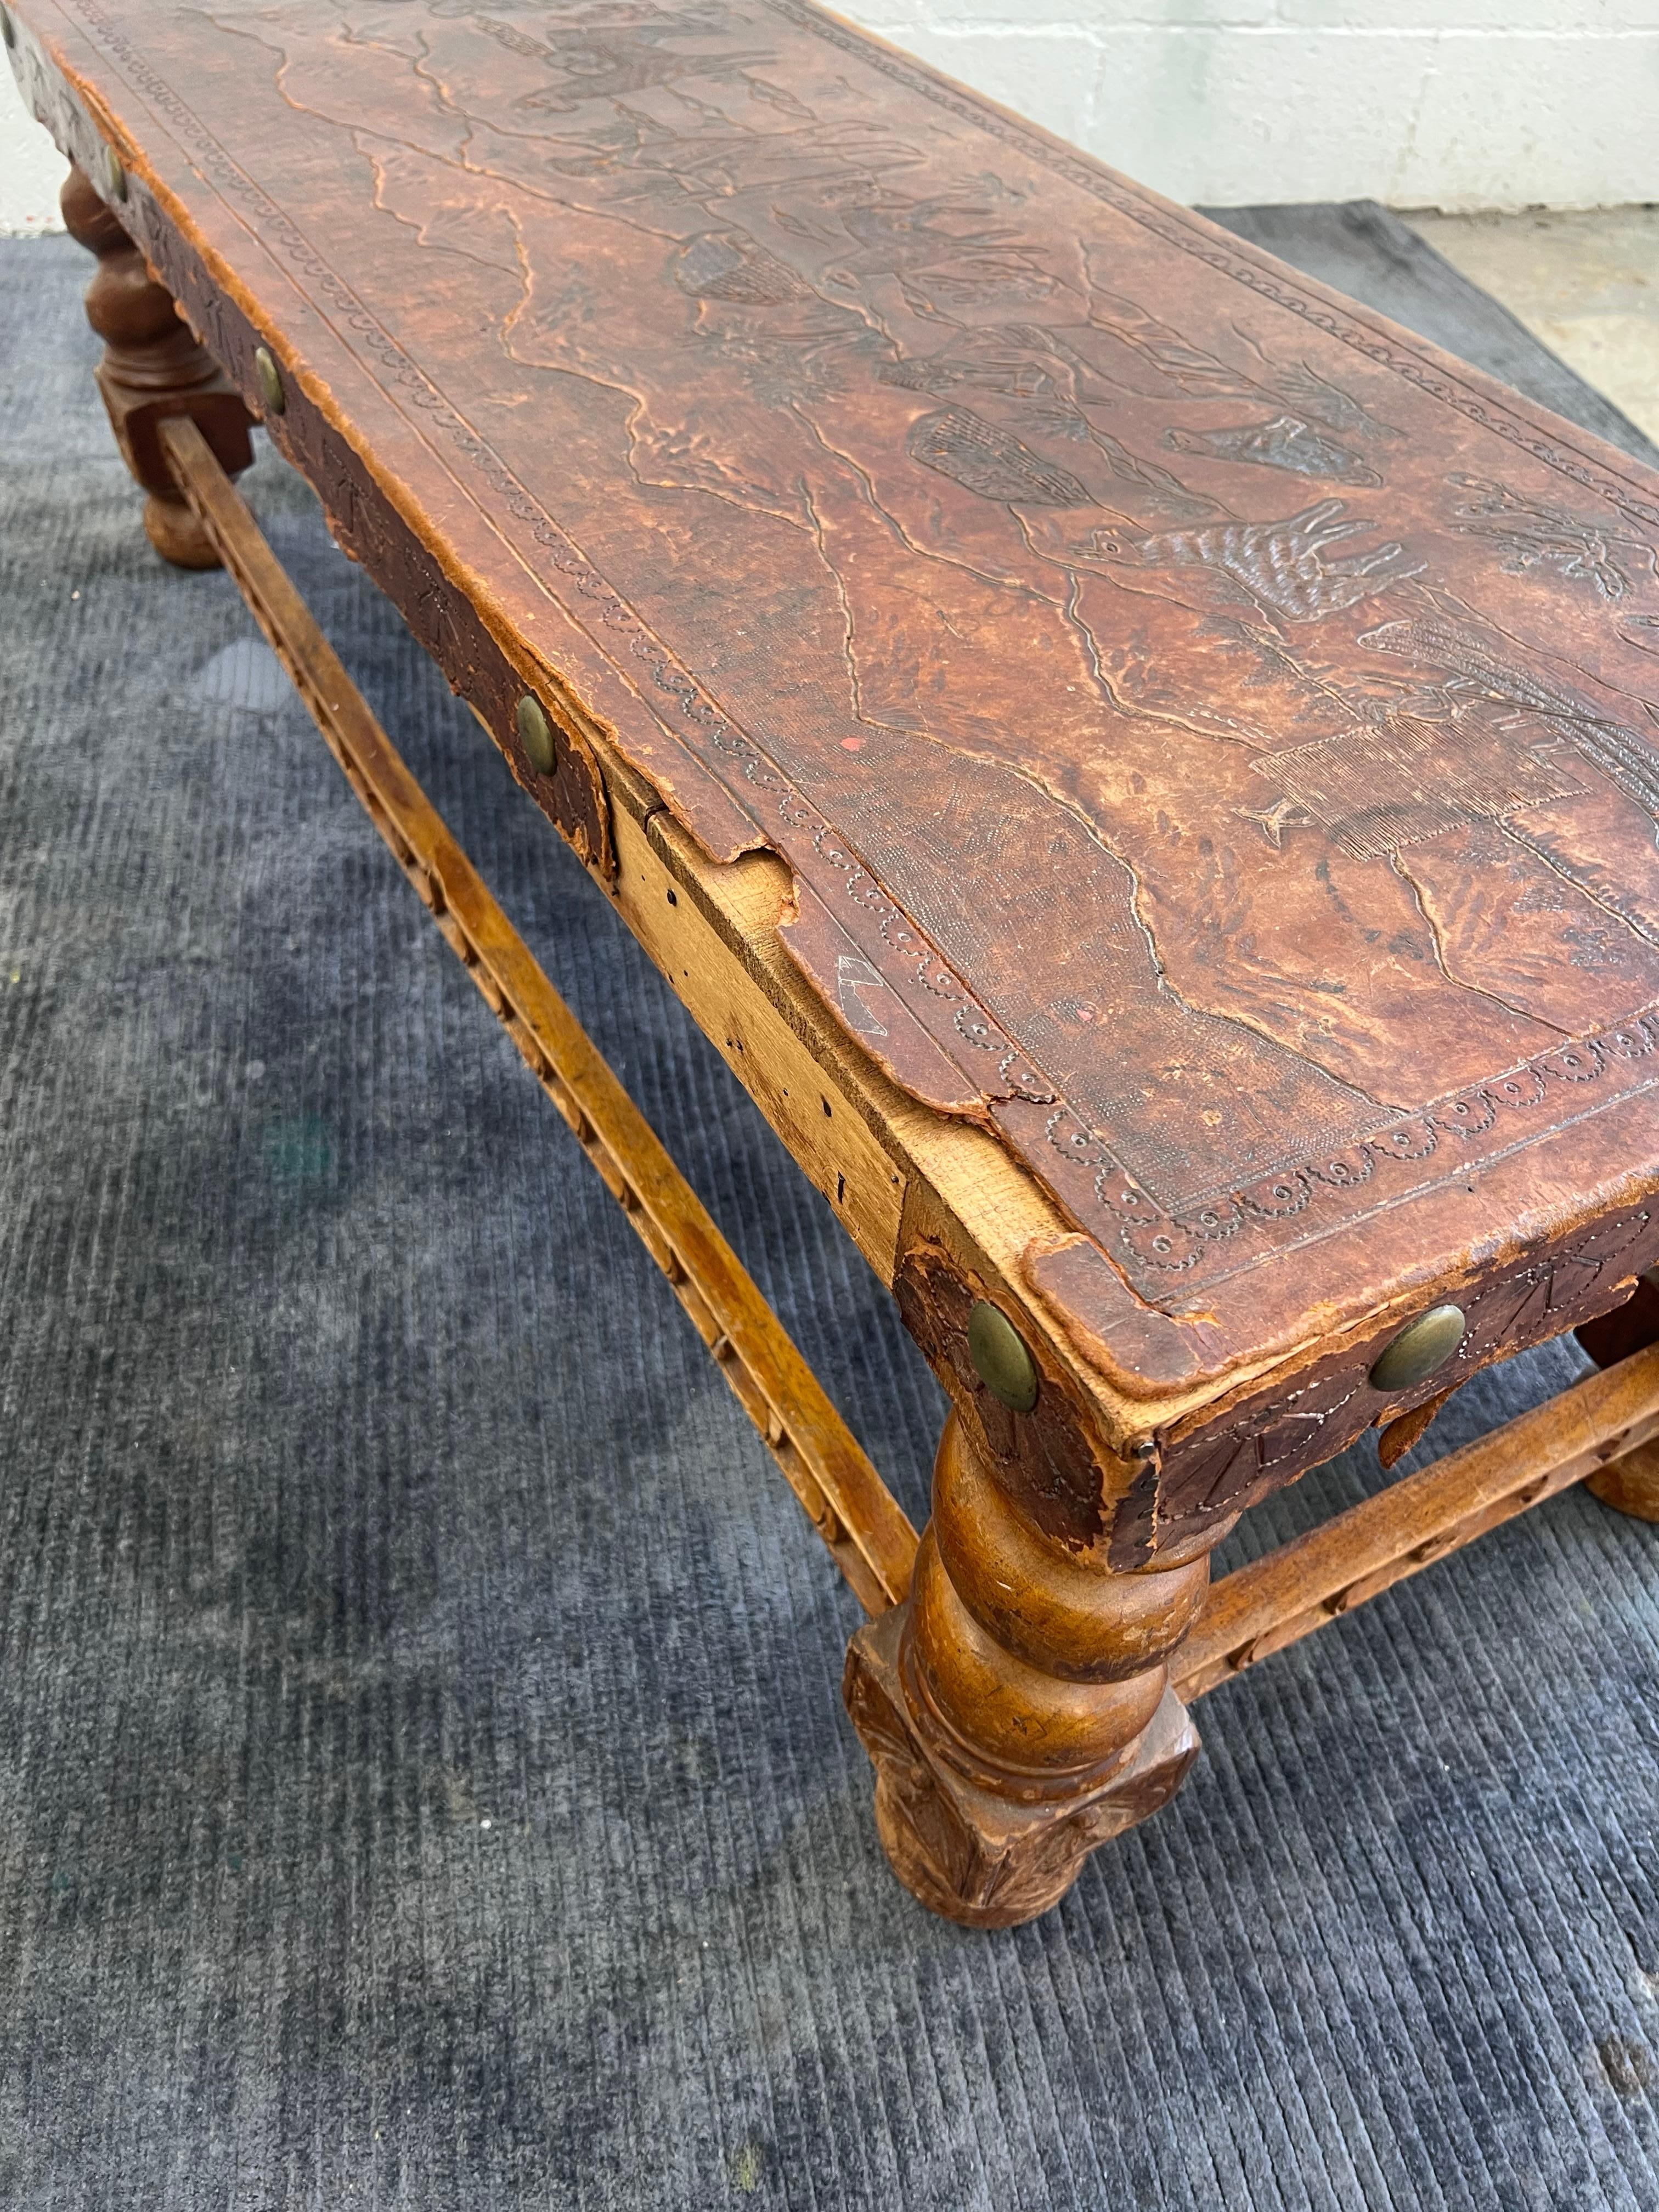 Antique leather bound coffee table, Peruvian, Spanish revival  3